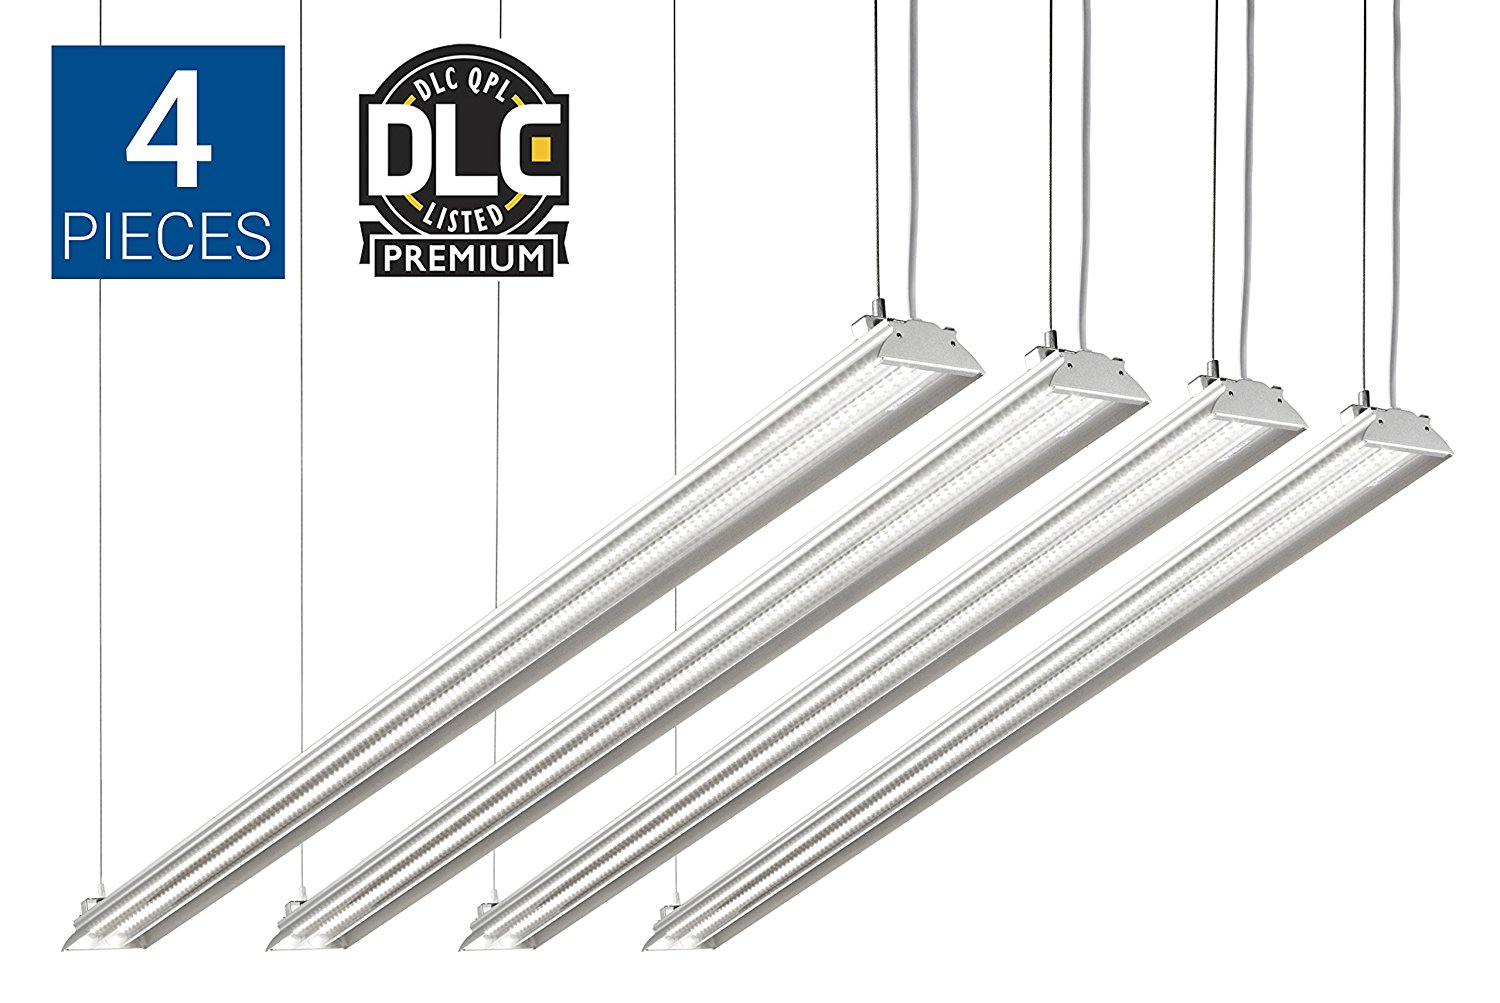 HyperSelect LED Shop Lights, 4ft Garage Utility LED Light Integrated Fixture, 35W (100W Eq.),3800 Lumens, 5000K, DLC 4.2 , Clear Cover - Perfect for Garages, Workshops, Warehouses and Barns - 4 Pack